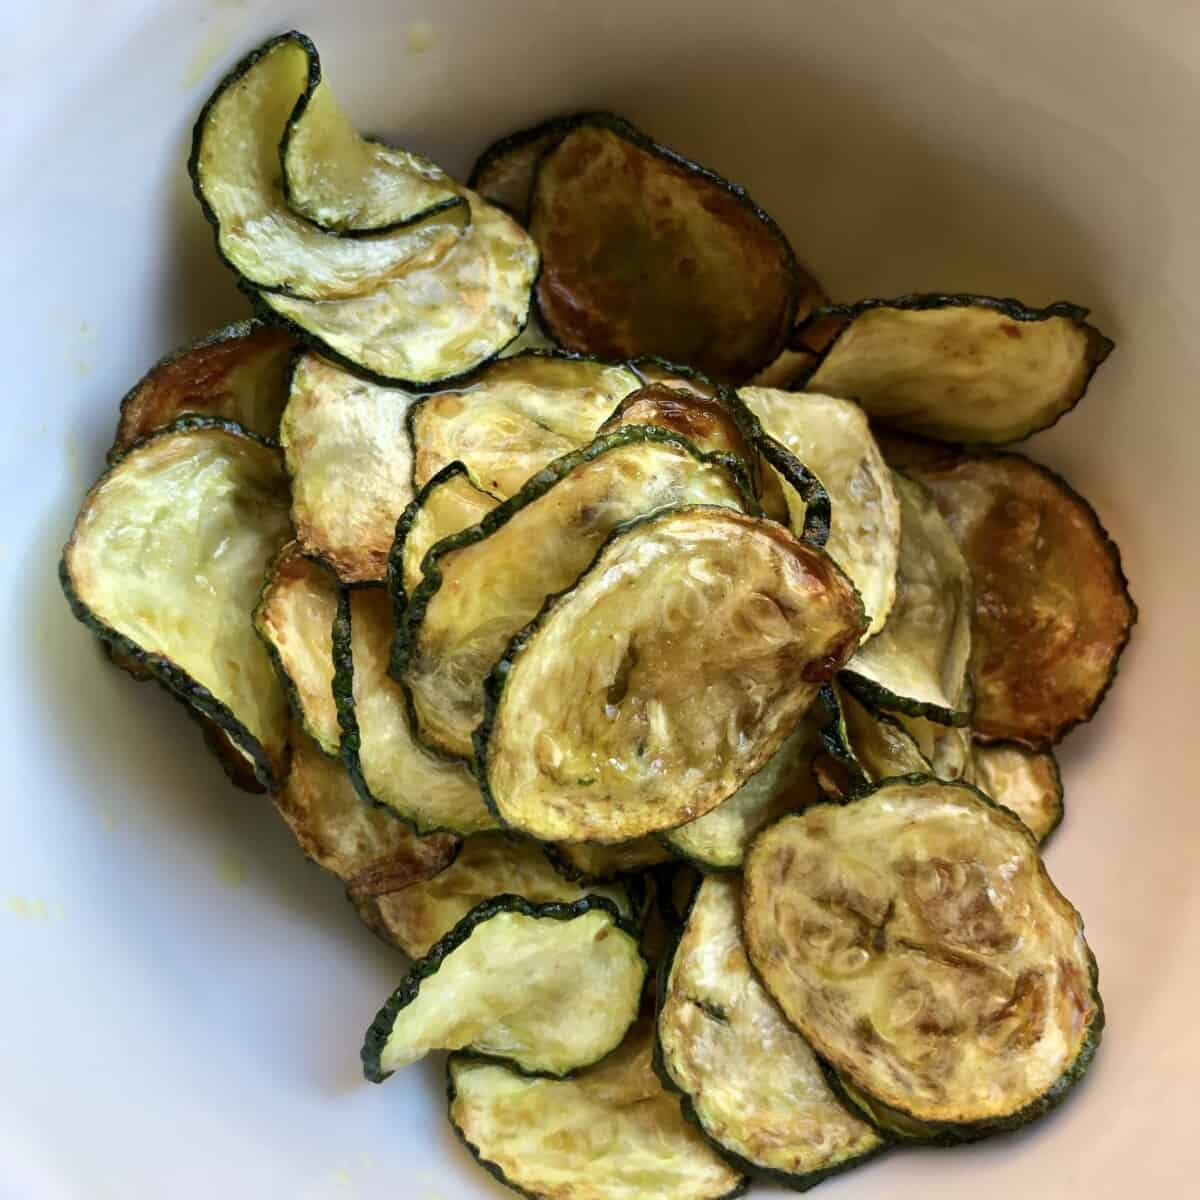 Thin slices of lightly fried zucchini for paccheri pasta.